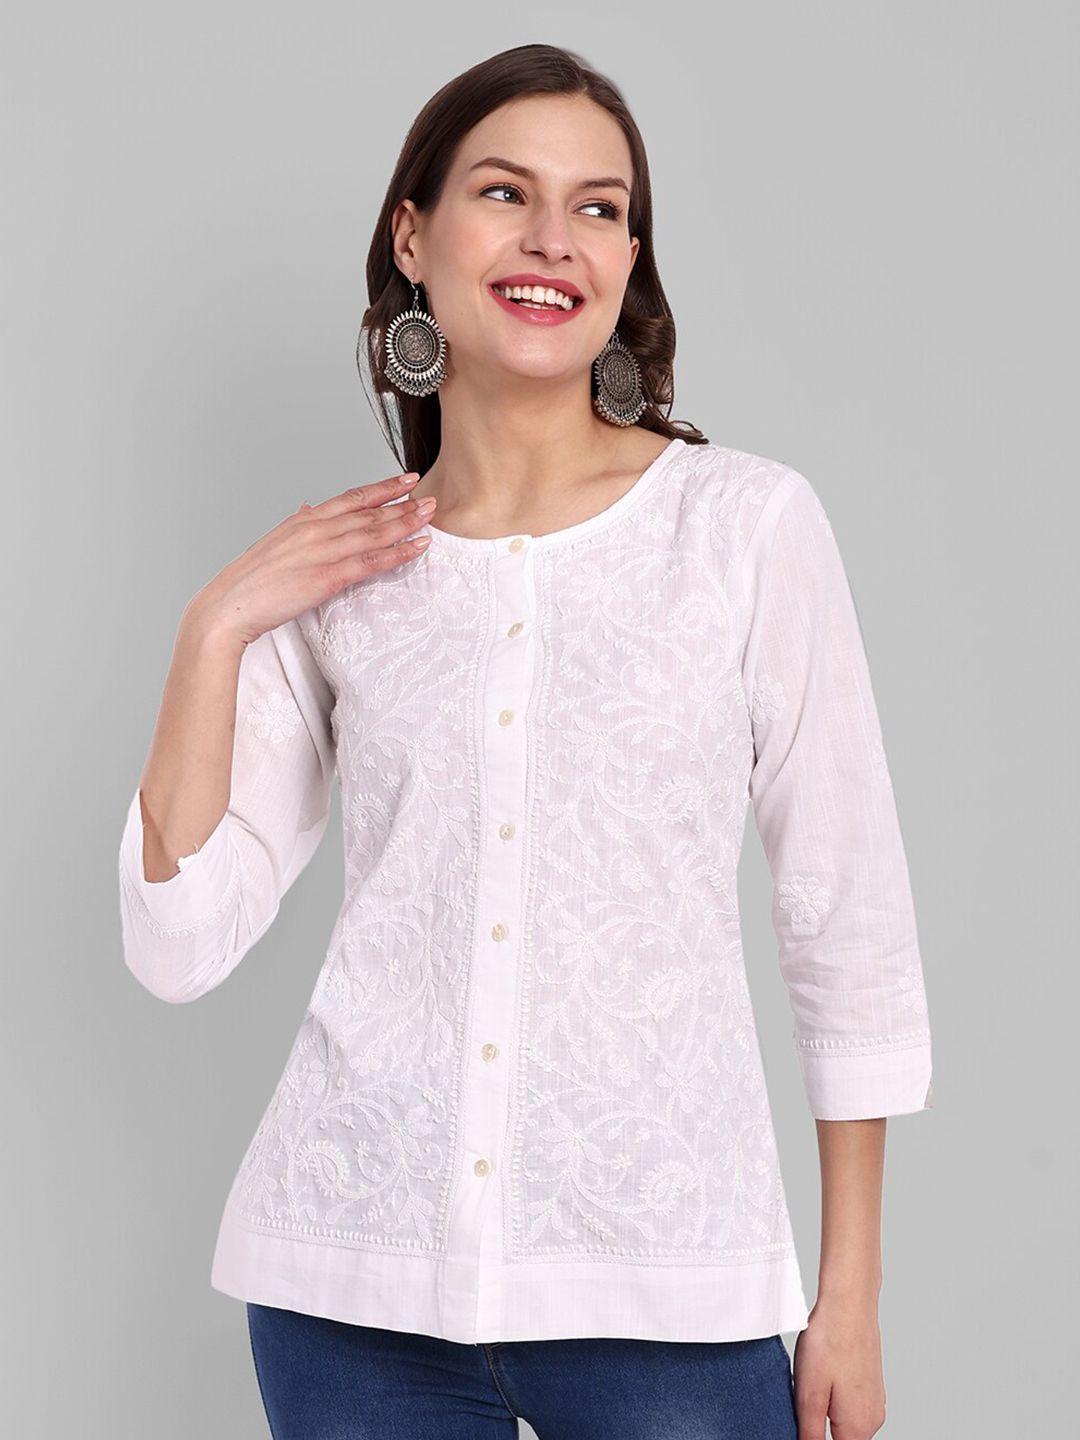 ada floral embroidered round neck pure cotton chikankari shirt style top